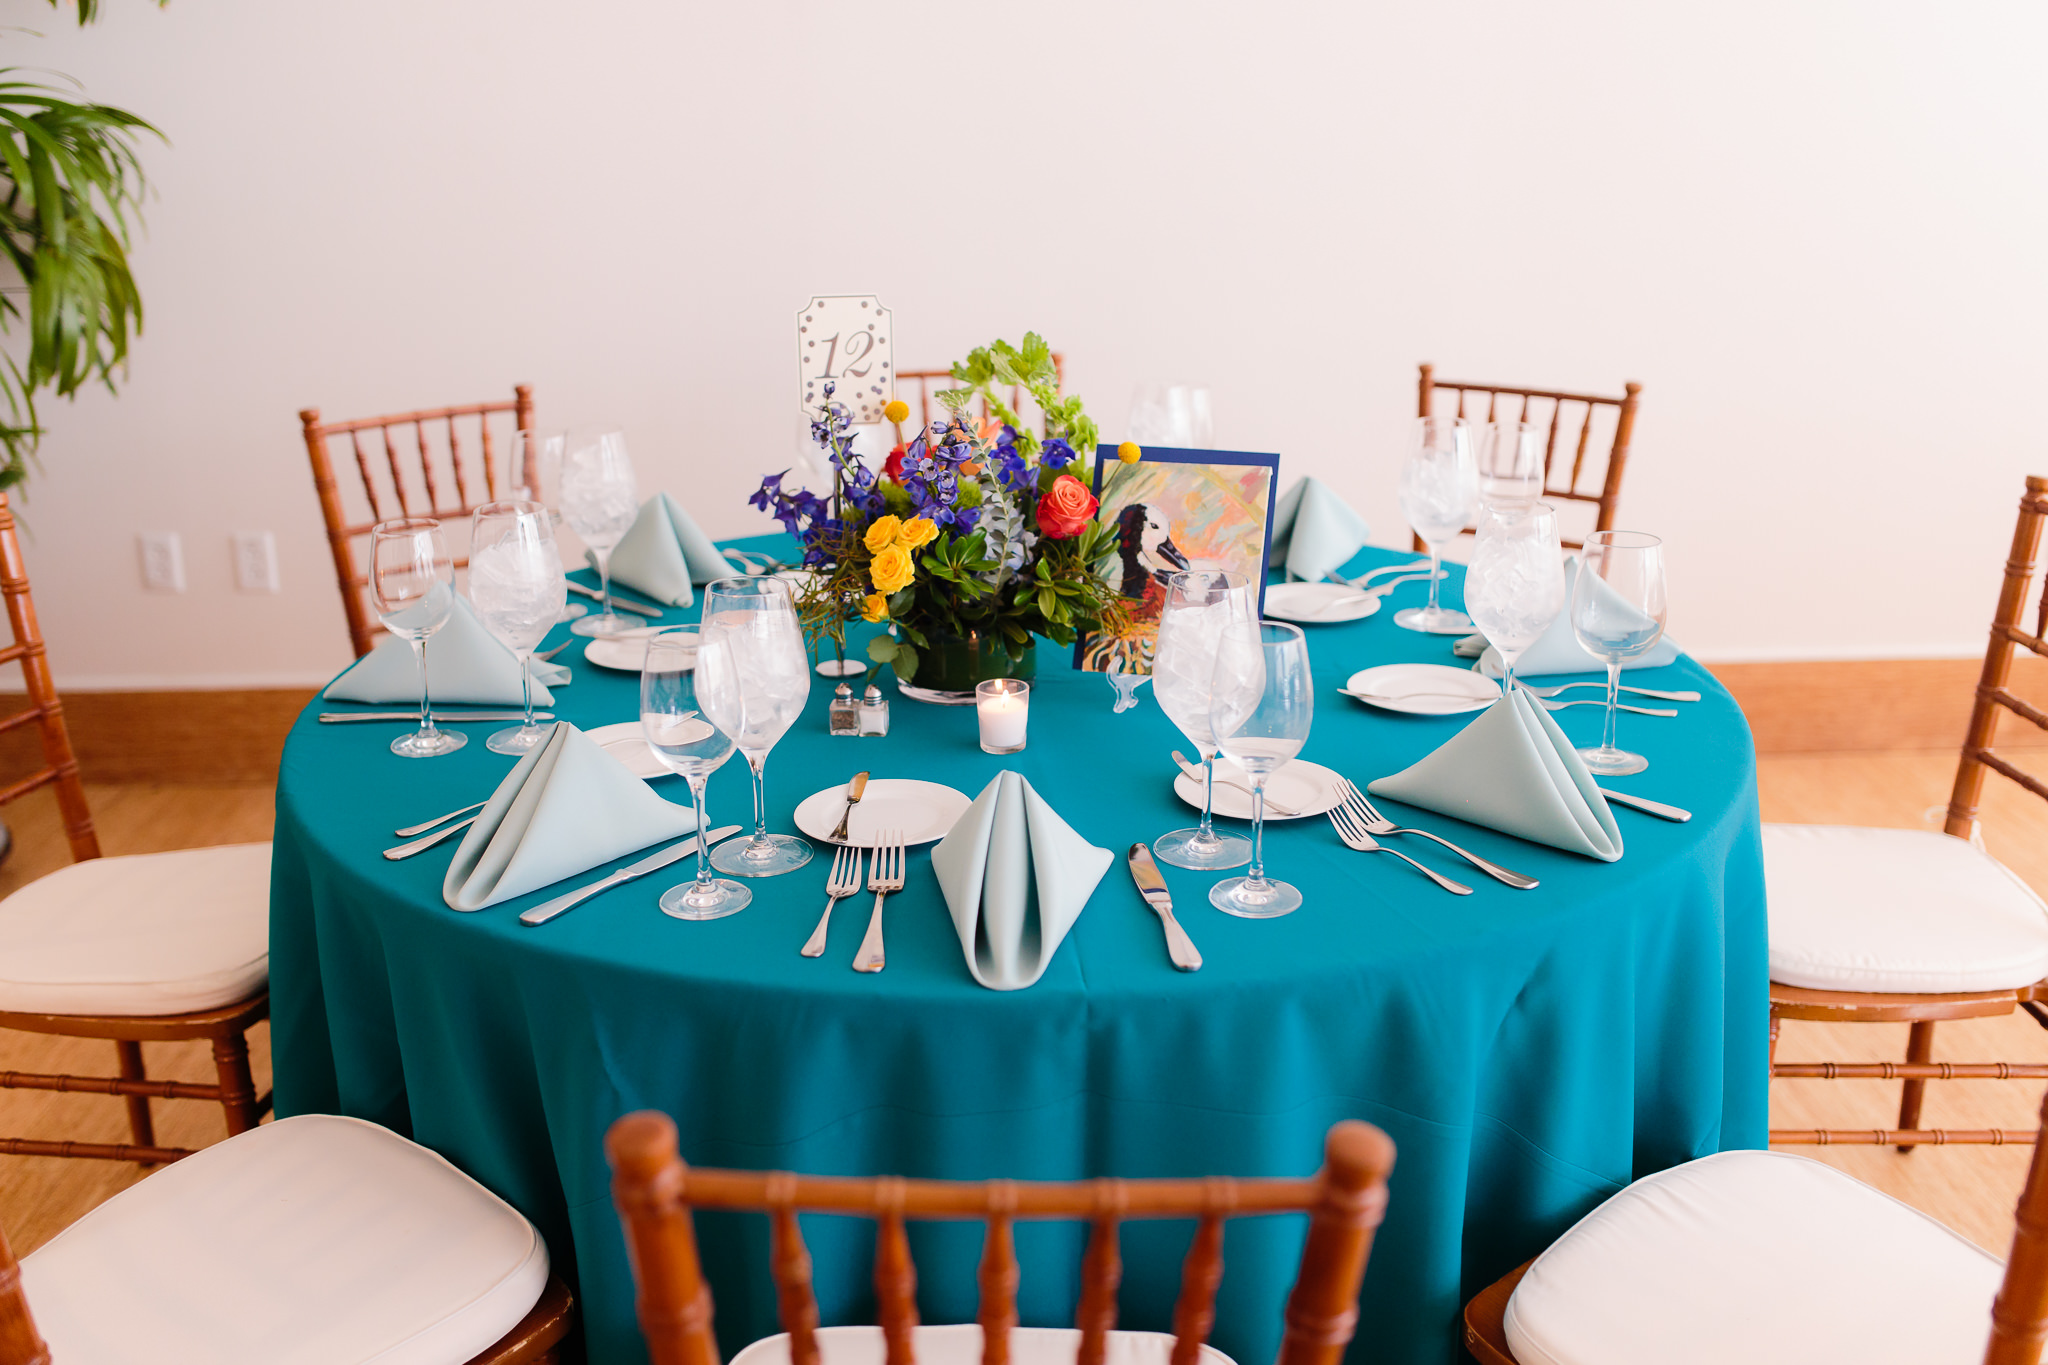 Teal tablecloths and colorful flowers by Hepatica decorate each table at a Phipps Conservatory wedding